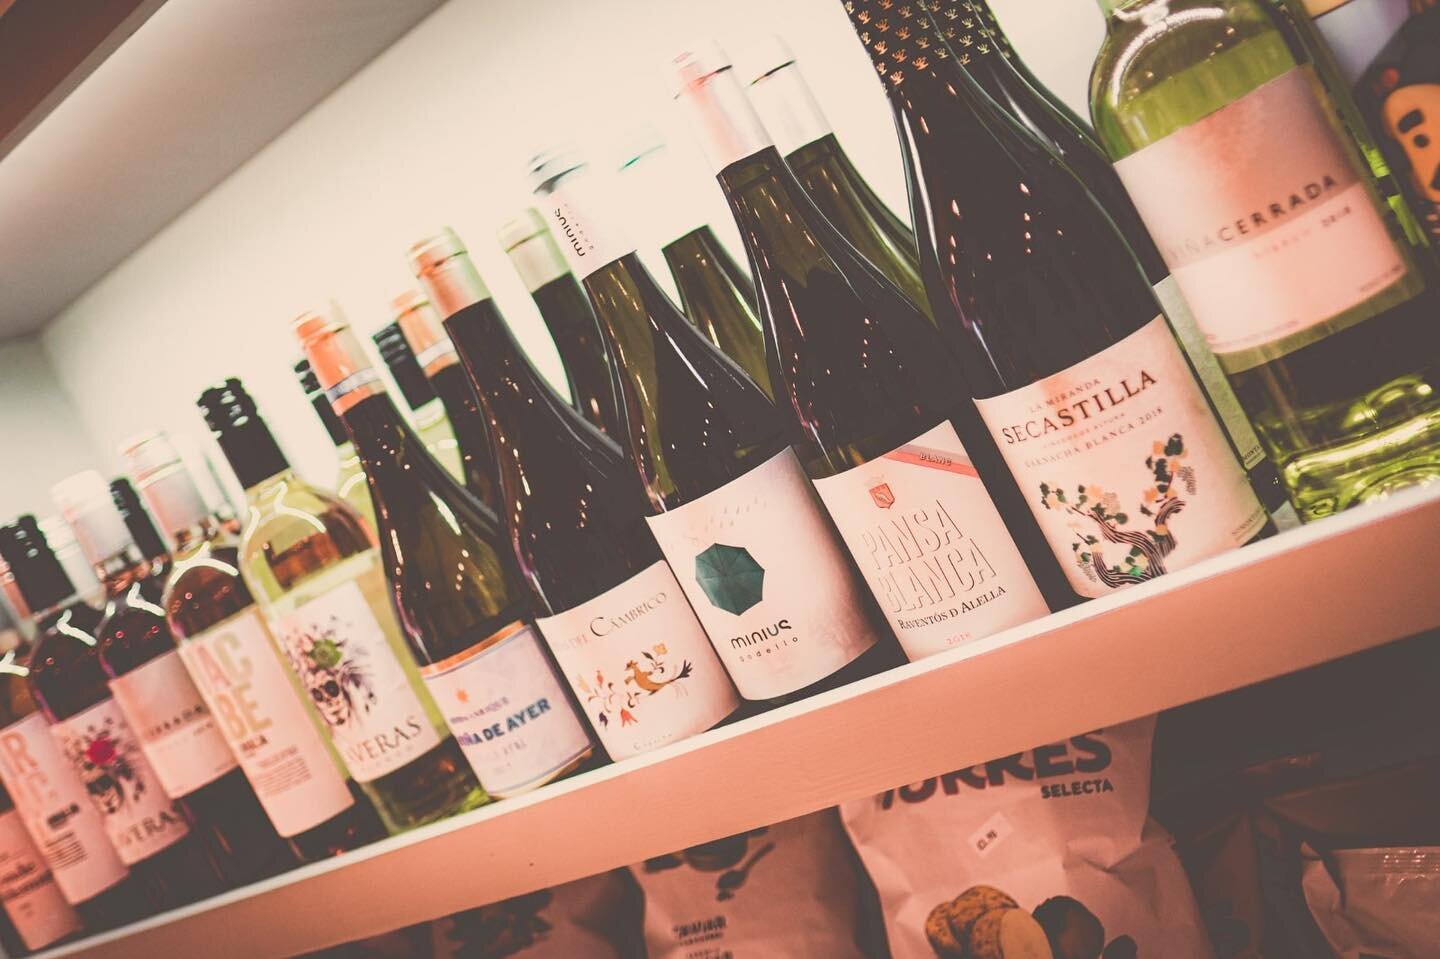 We've got some gorgeous wines in...

What's your favourite wine to go with your tapas?